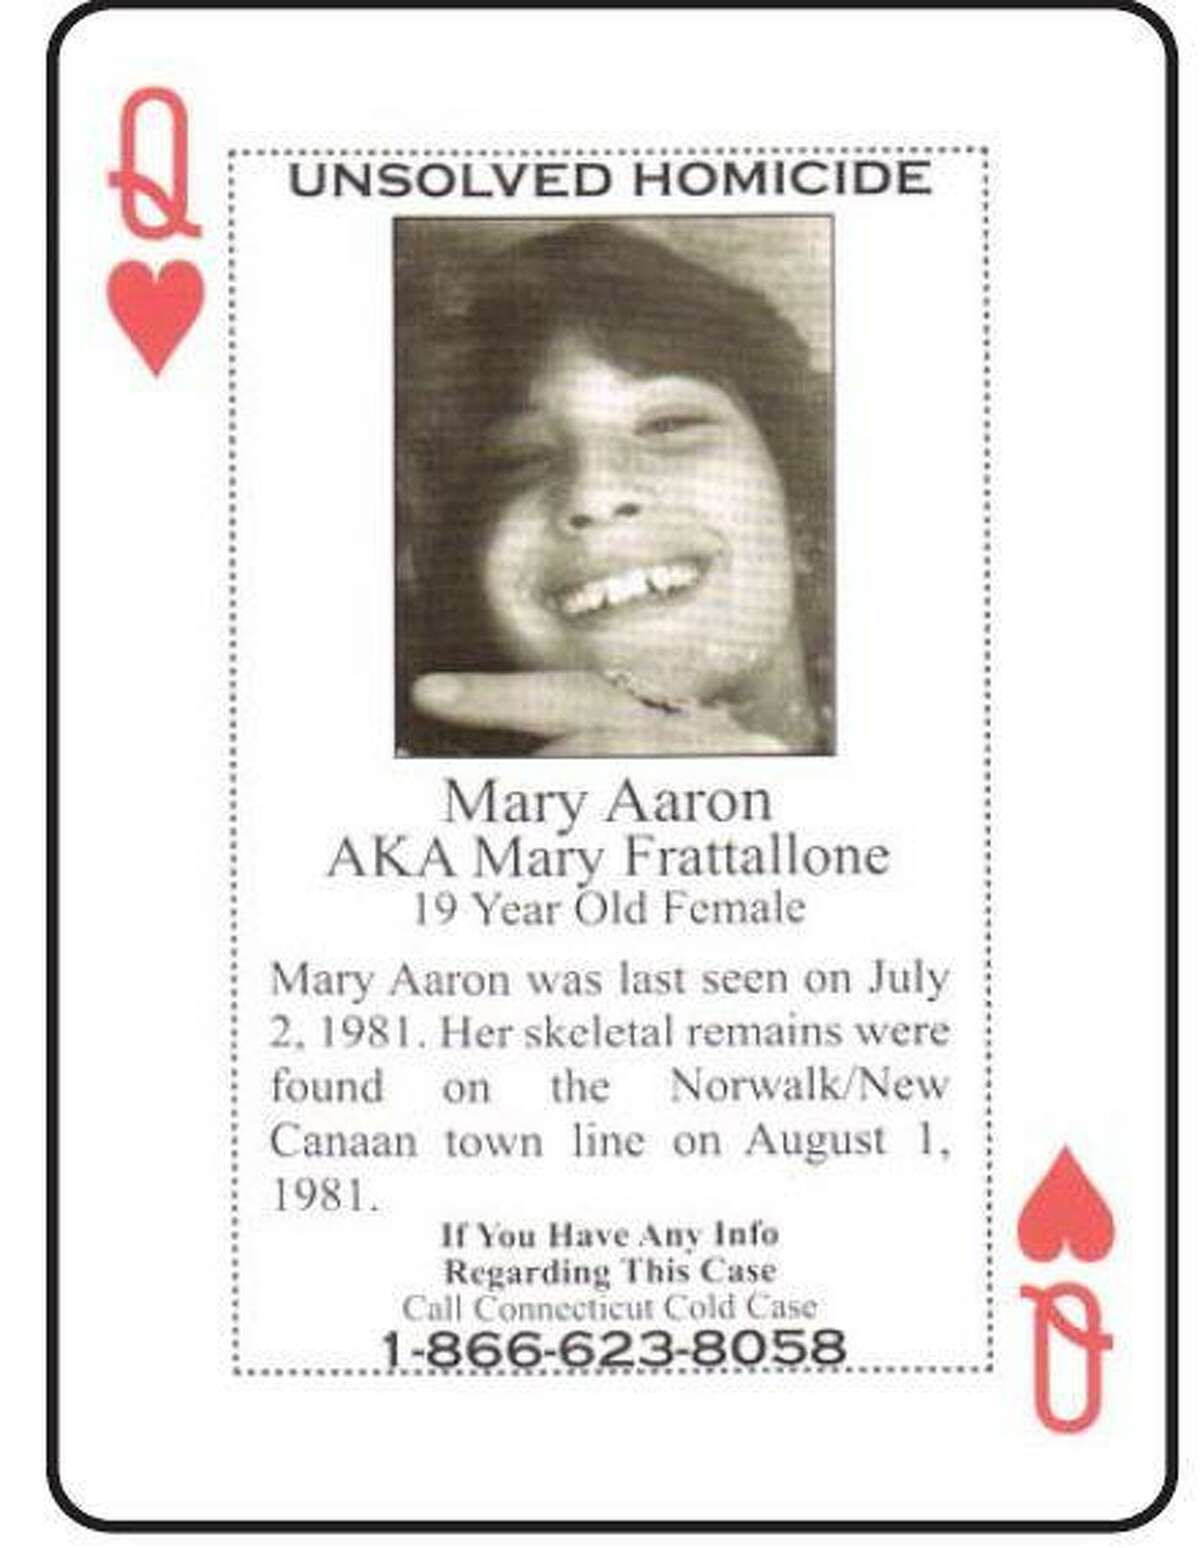 Mary Aaron, aka Mary Frattalone, 19, was last seen on July 2, 1981. On Aug. 1, 1981 her skeletal remains were found on the Norwalk/New Canaan border.